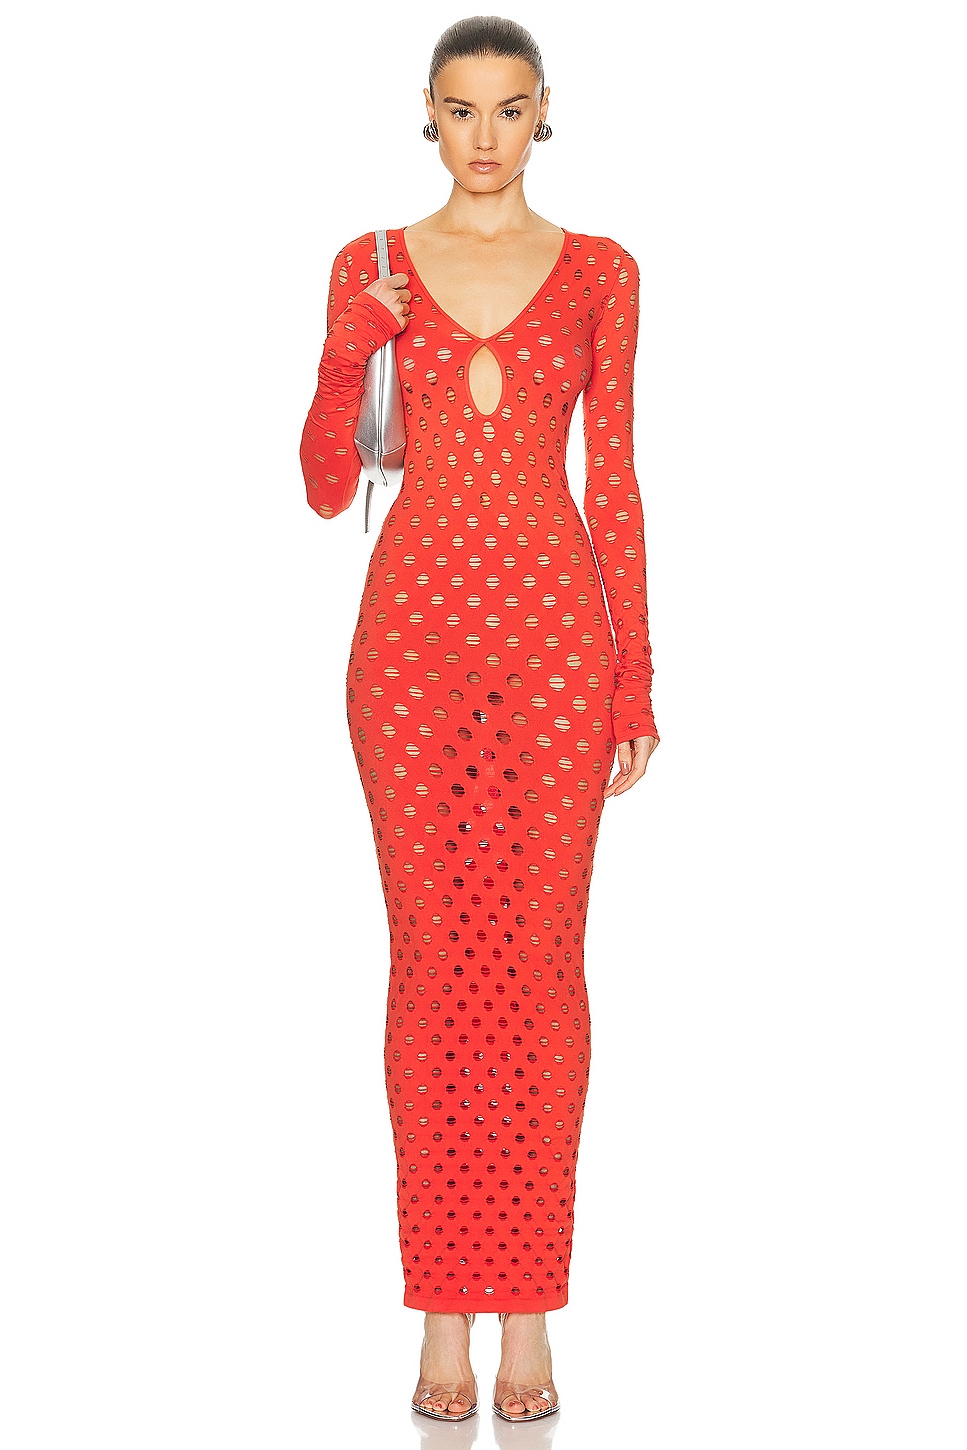 Image 1 of Maisie Wilen Perforated Gown in Tomato